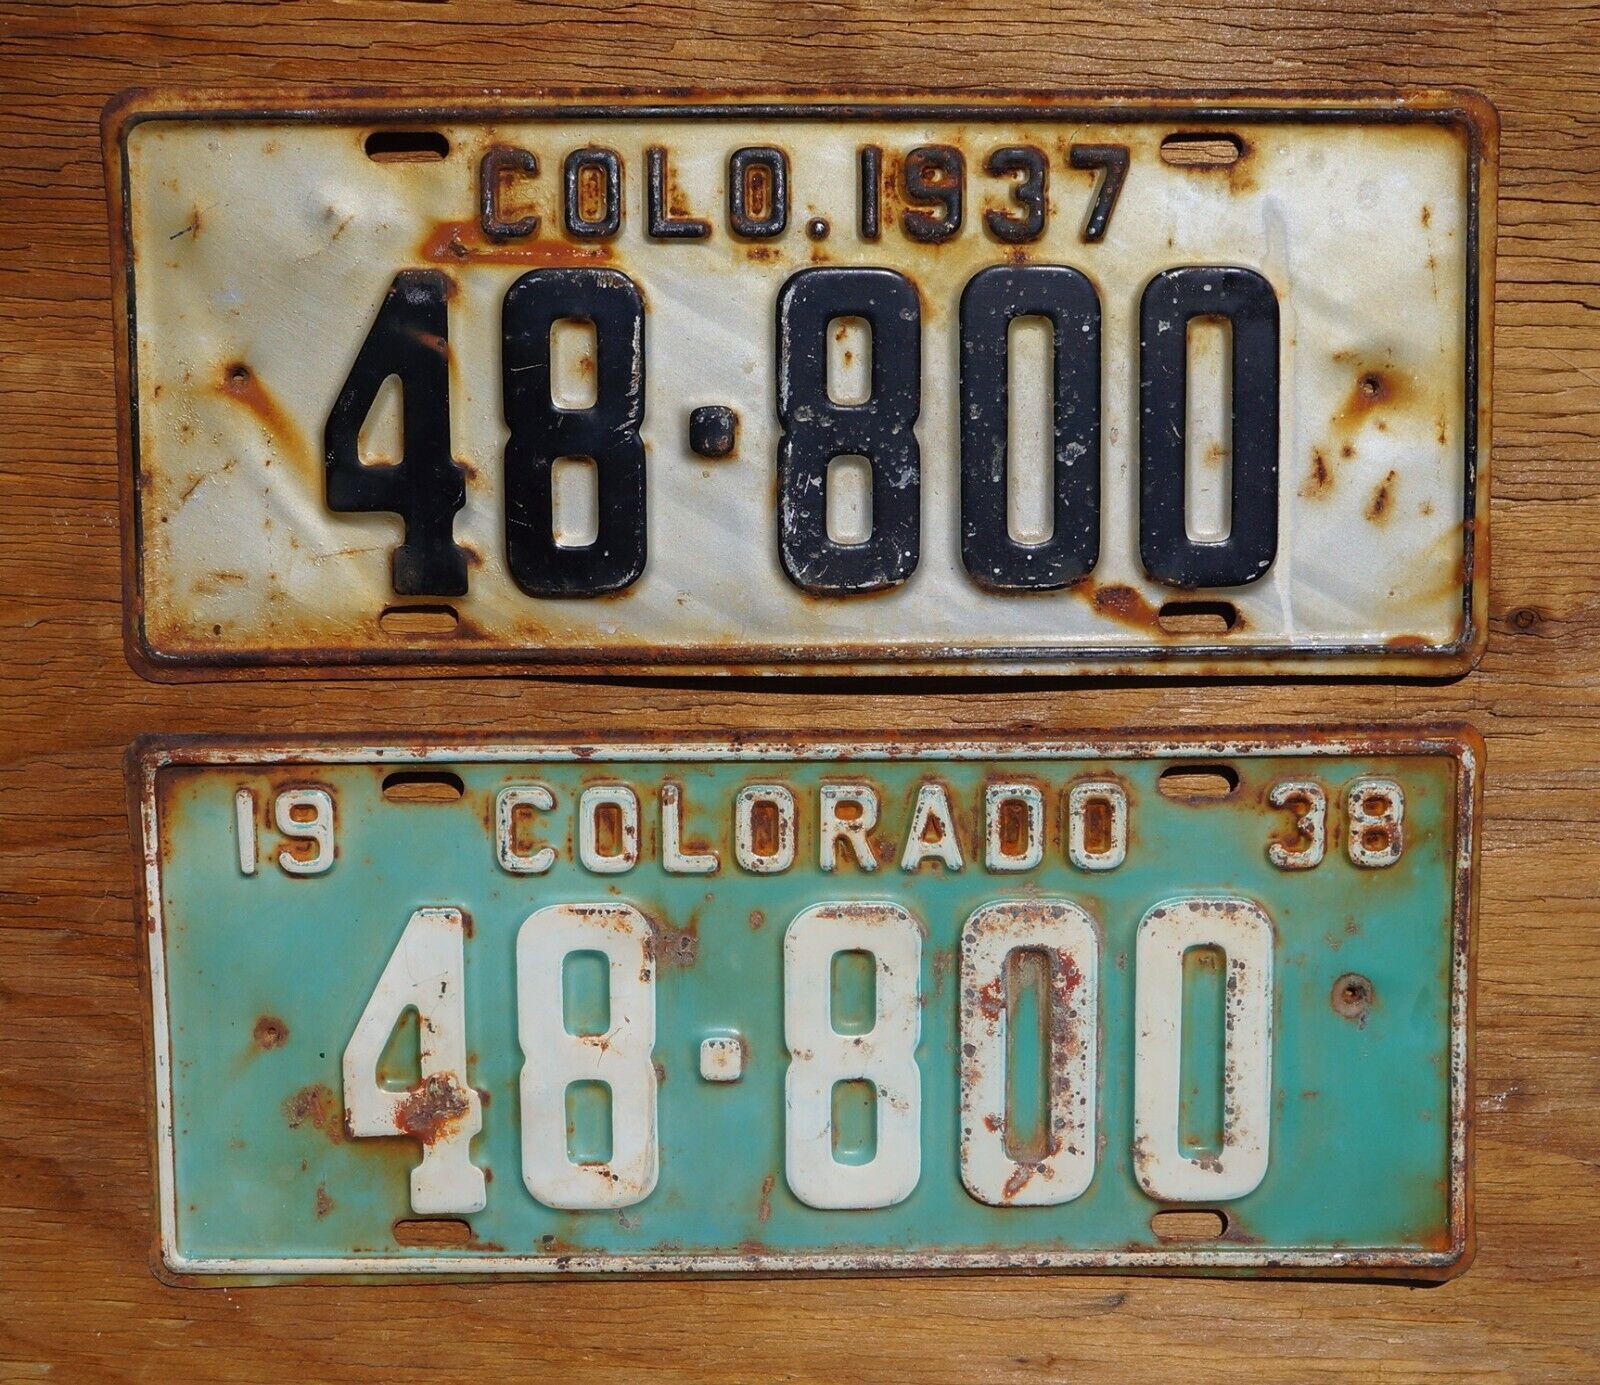 1937 & 1938 COLORADO License Plate Plates - LOT OF 2